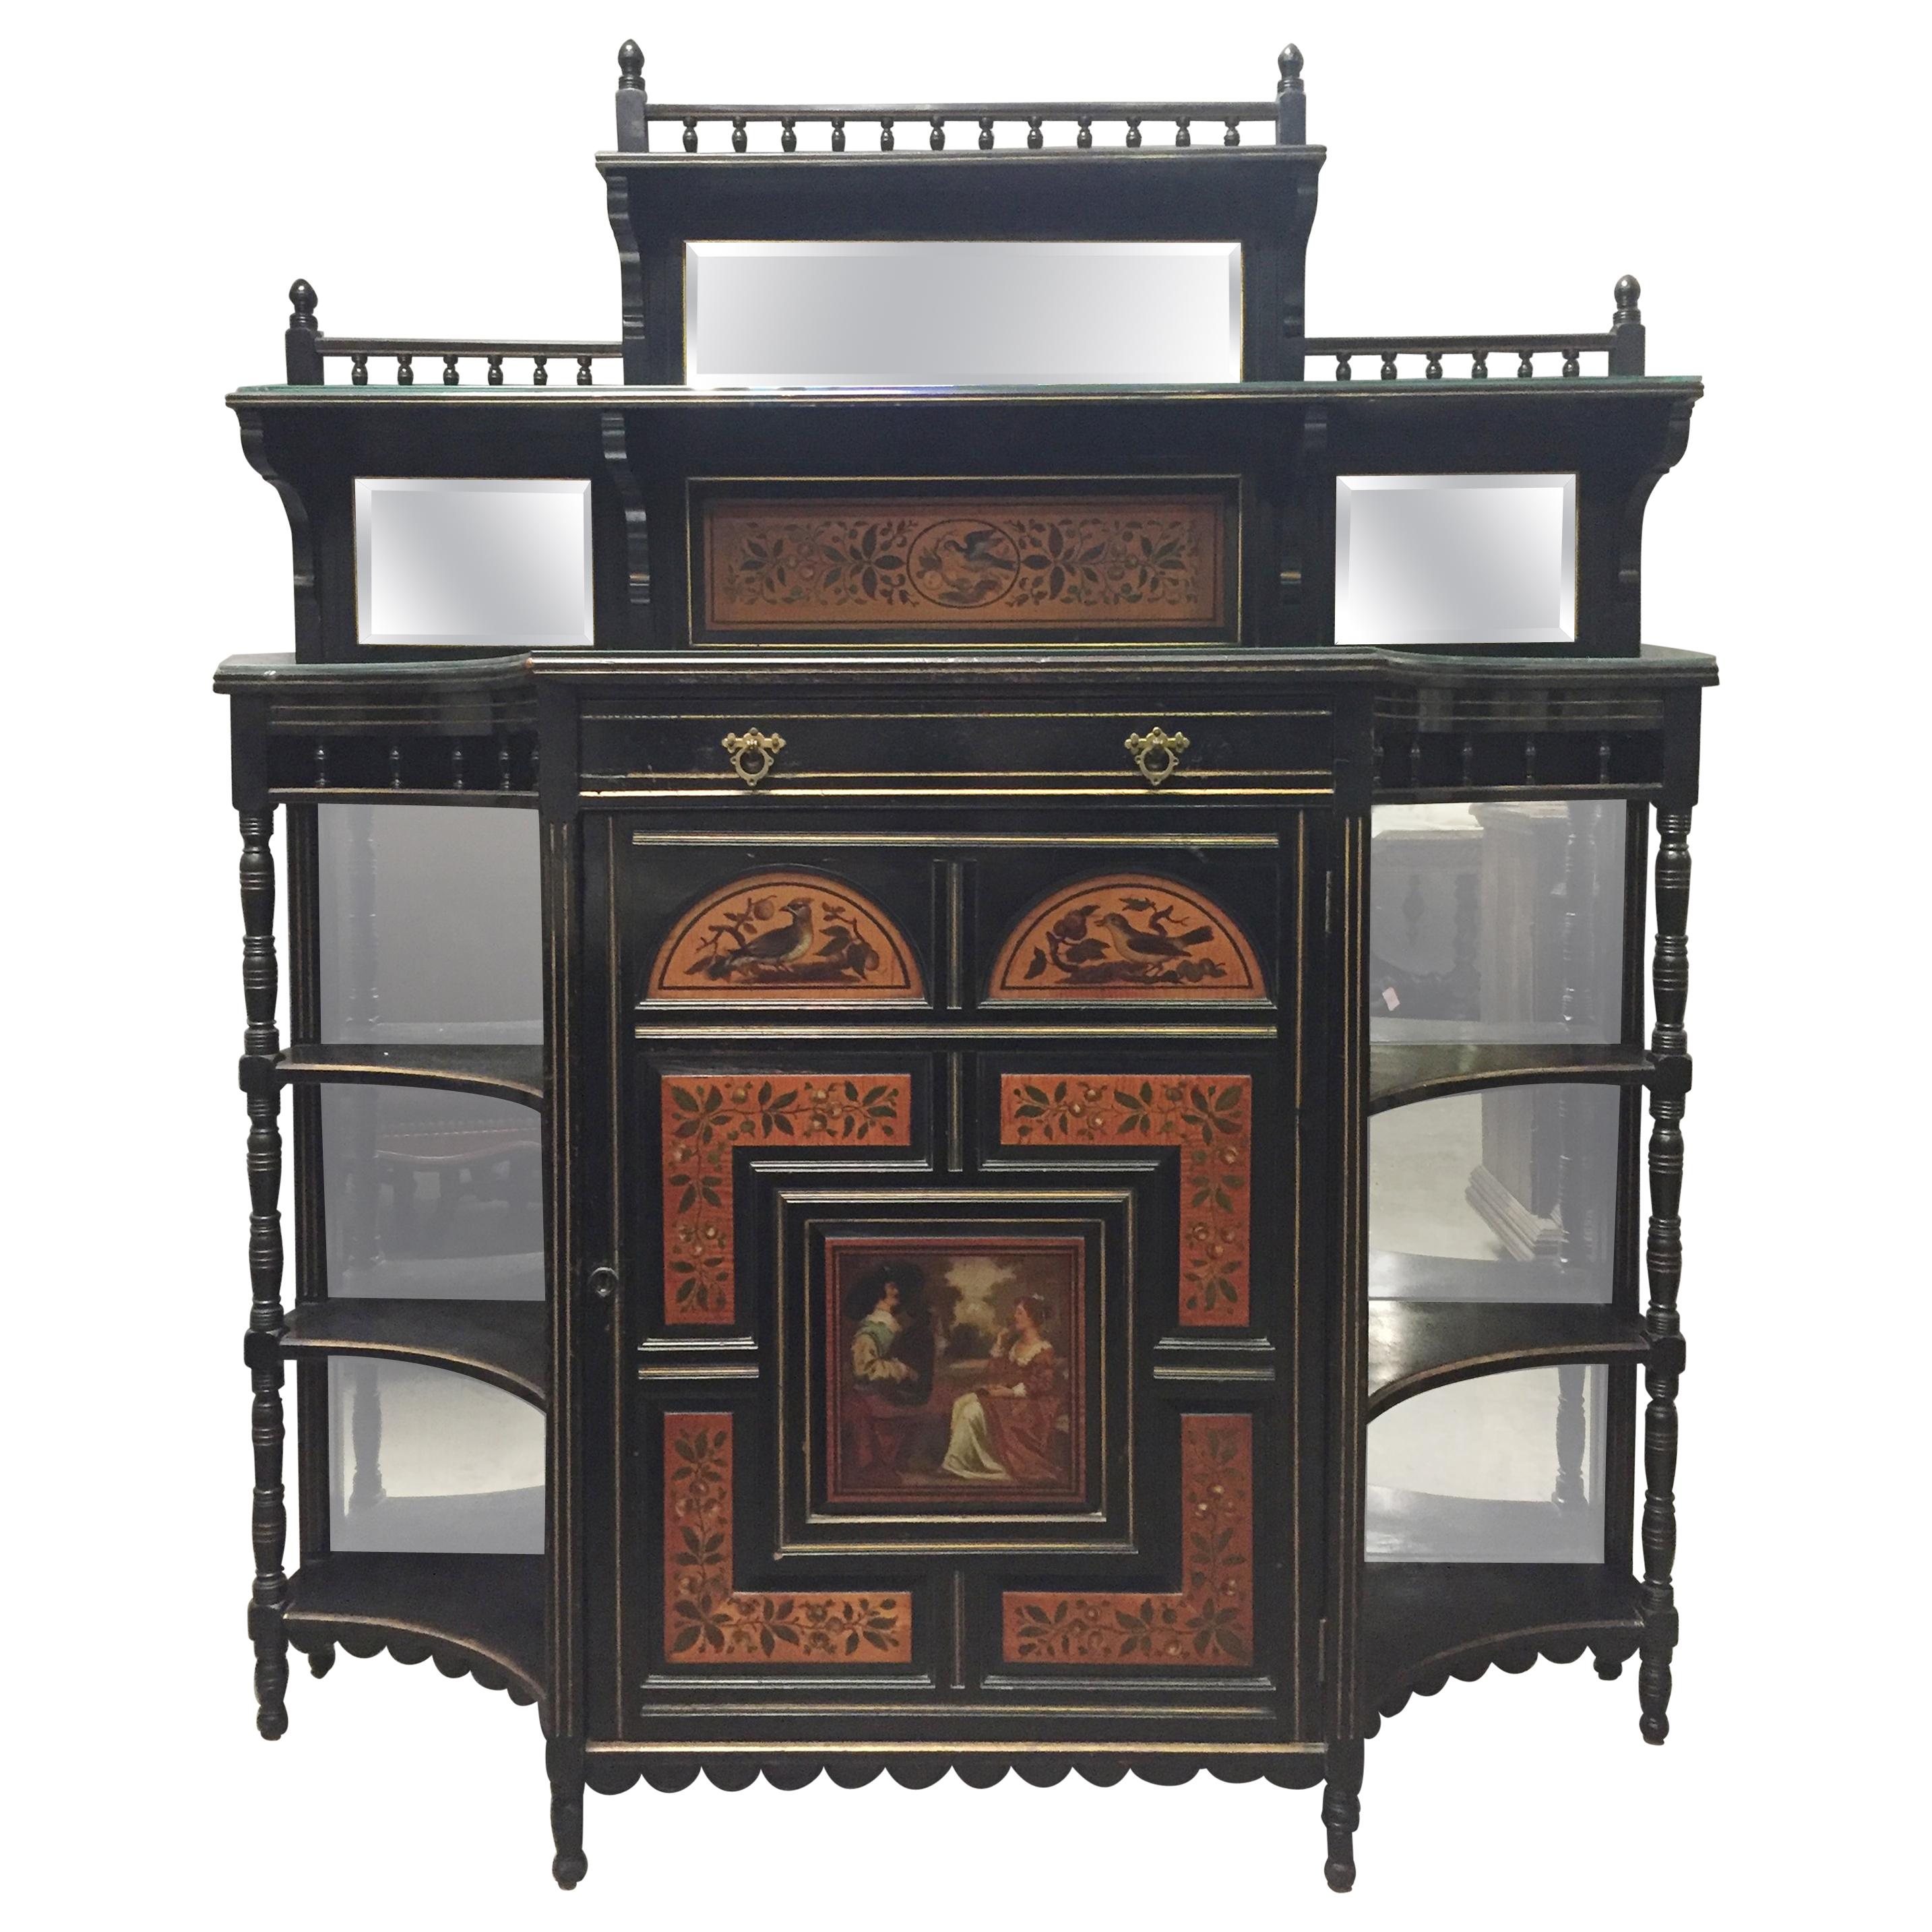 English Aesthetic Movement Painted Cabinet, 19th Century